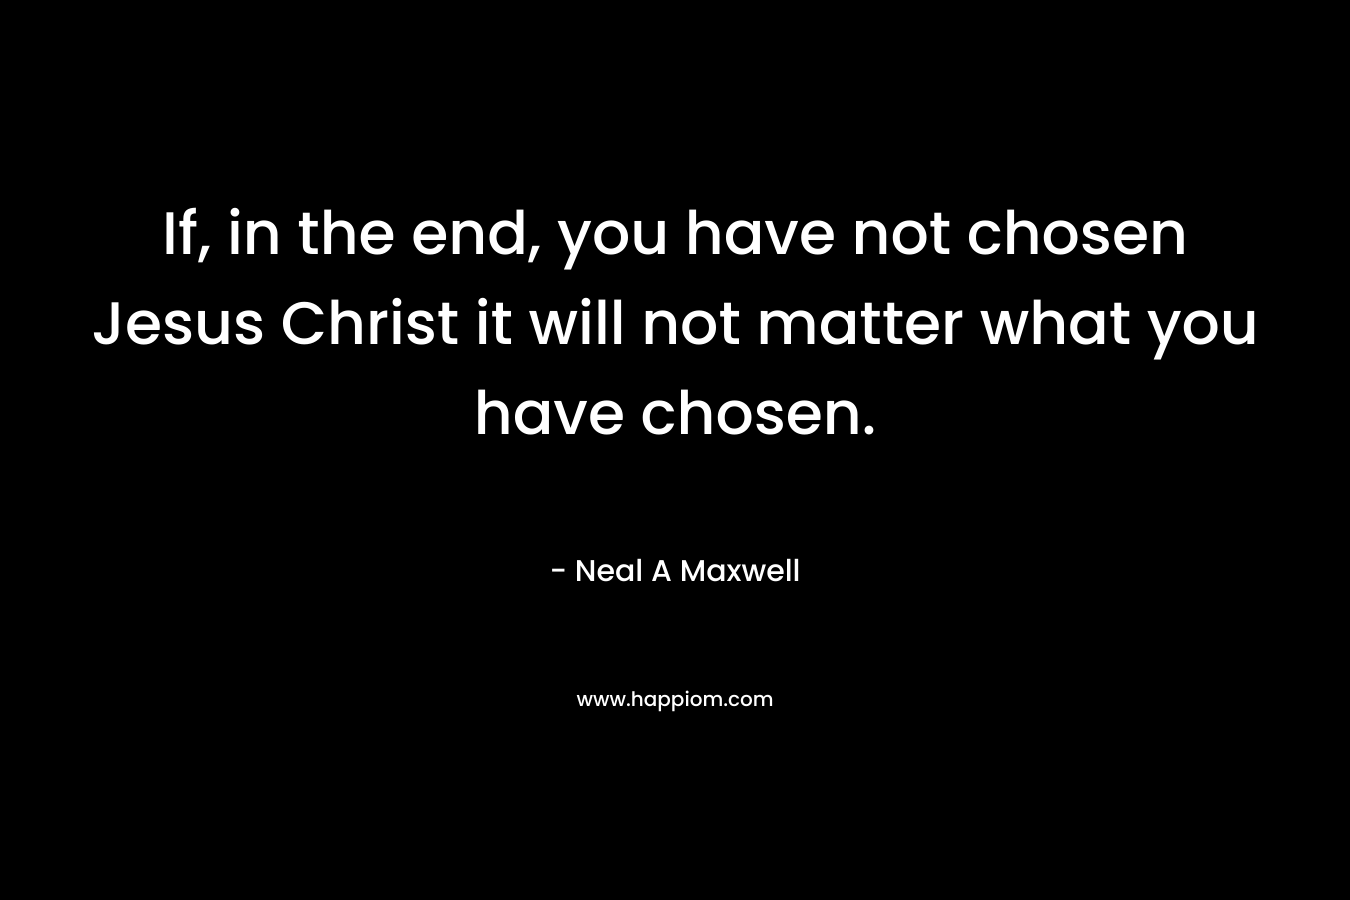 If, in the end, you have not chosen Jesus Christ it will not matter what you have chosen. – Neal A Maxwell